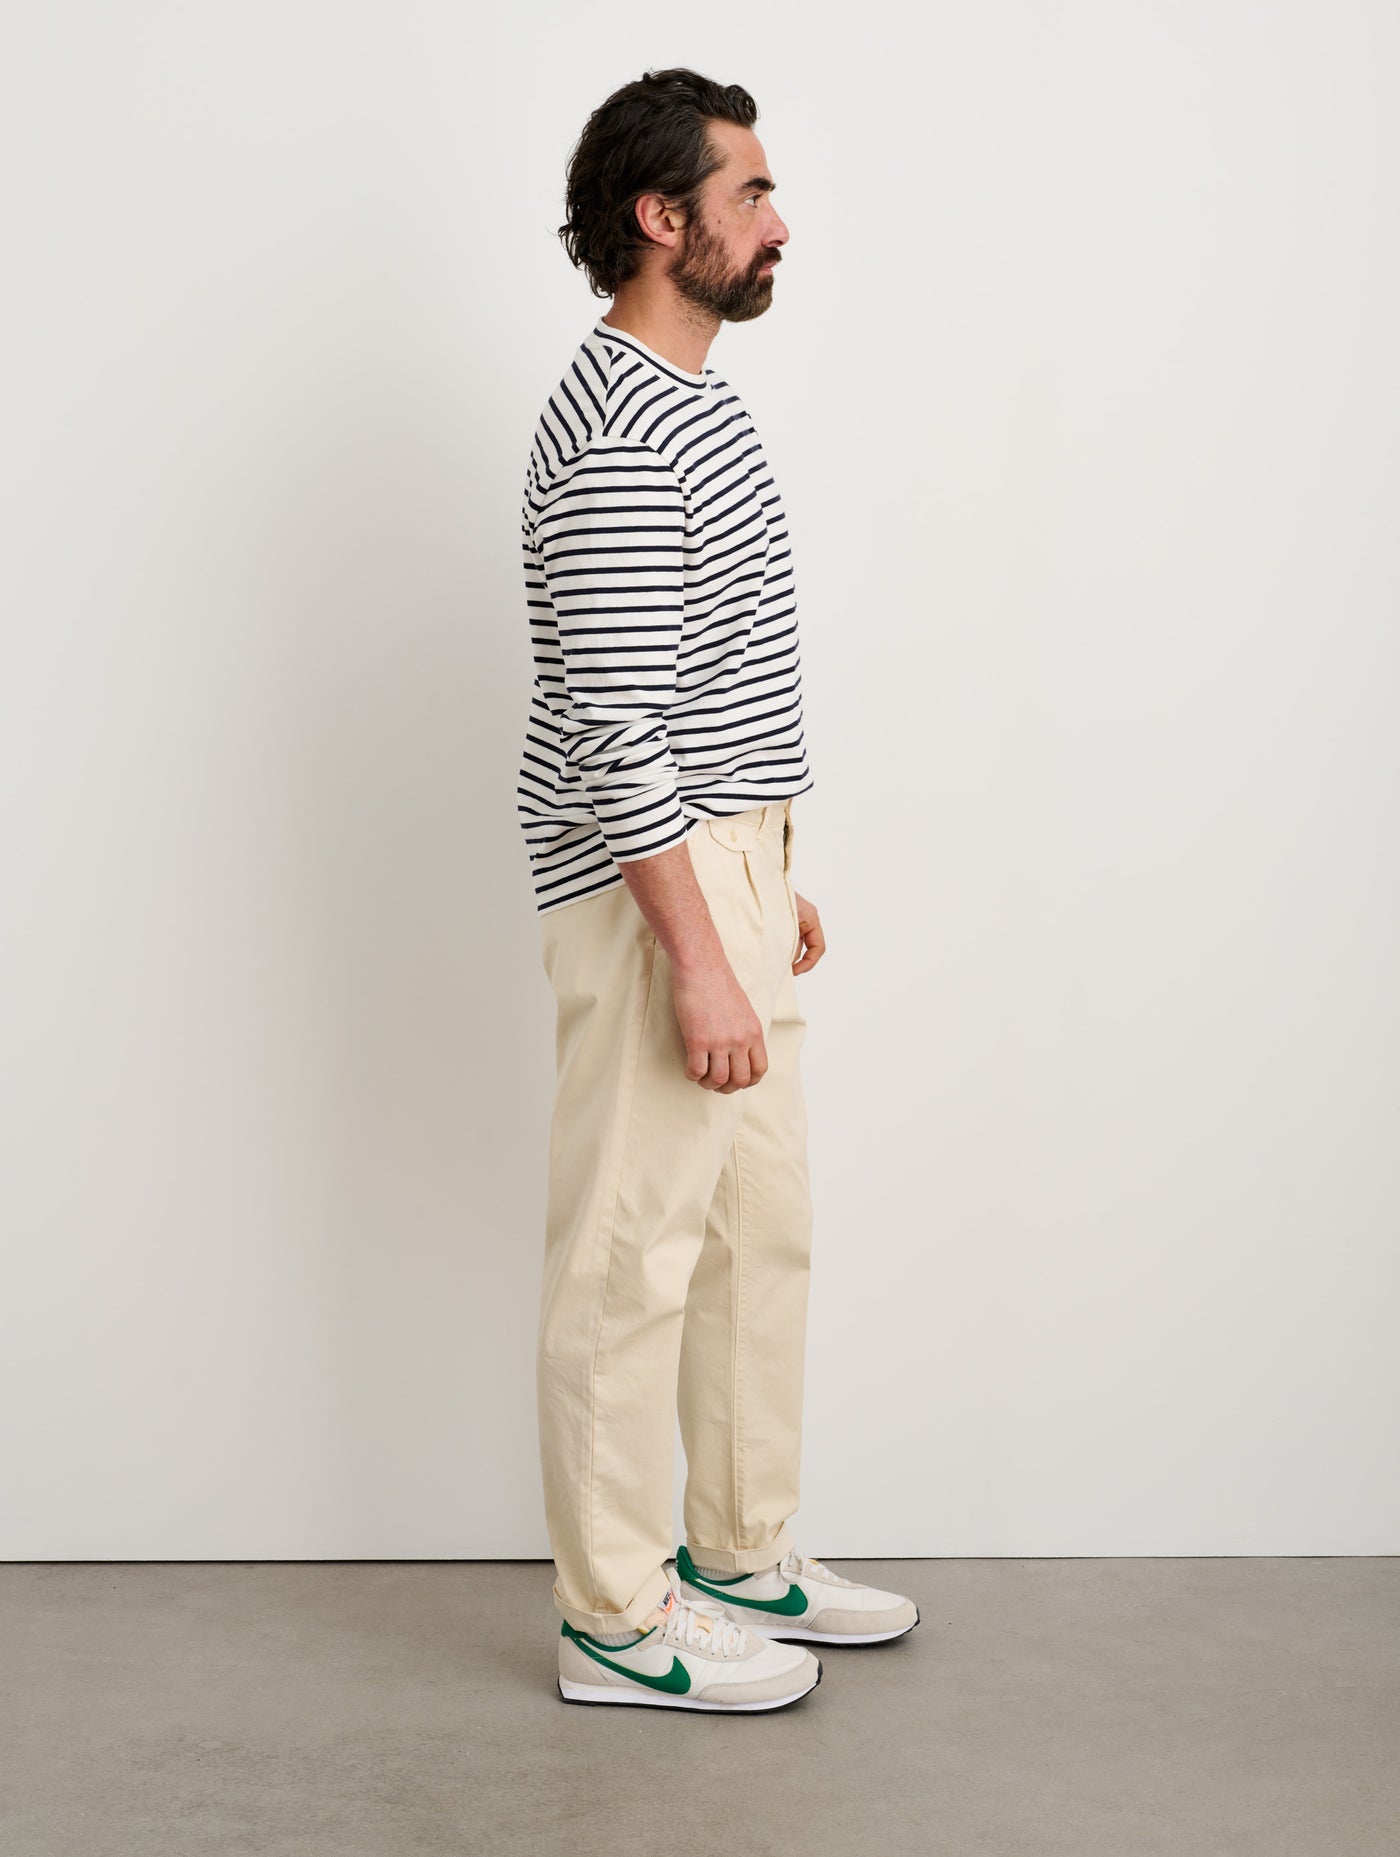 Standard Pleated Pant in Chino (Long Inseam)